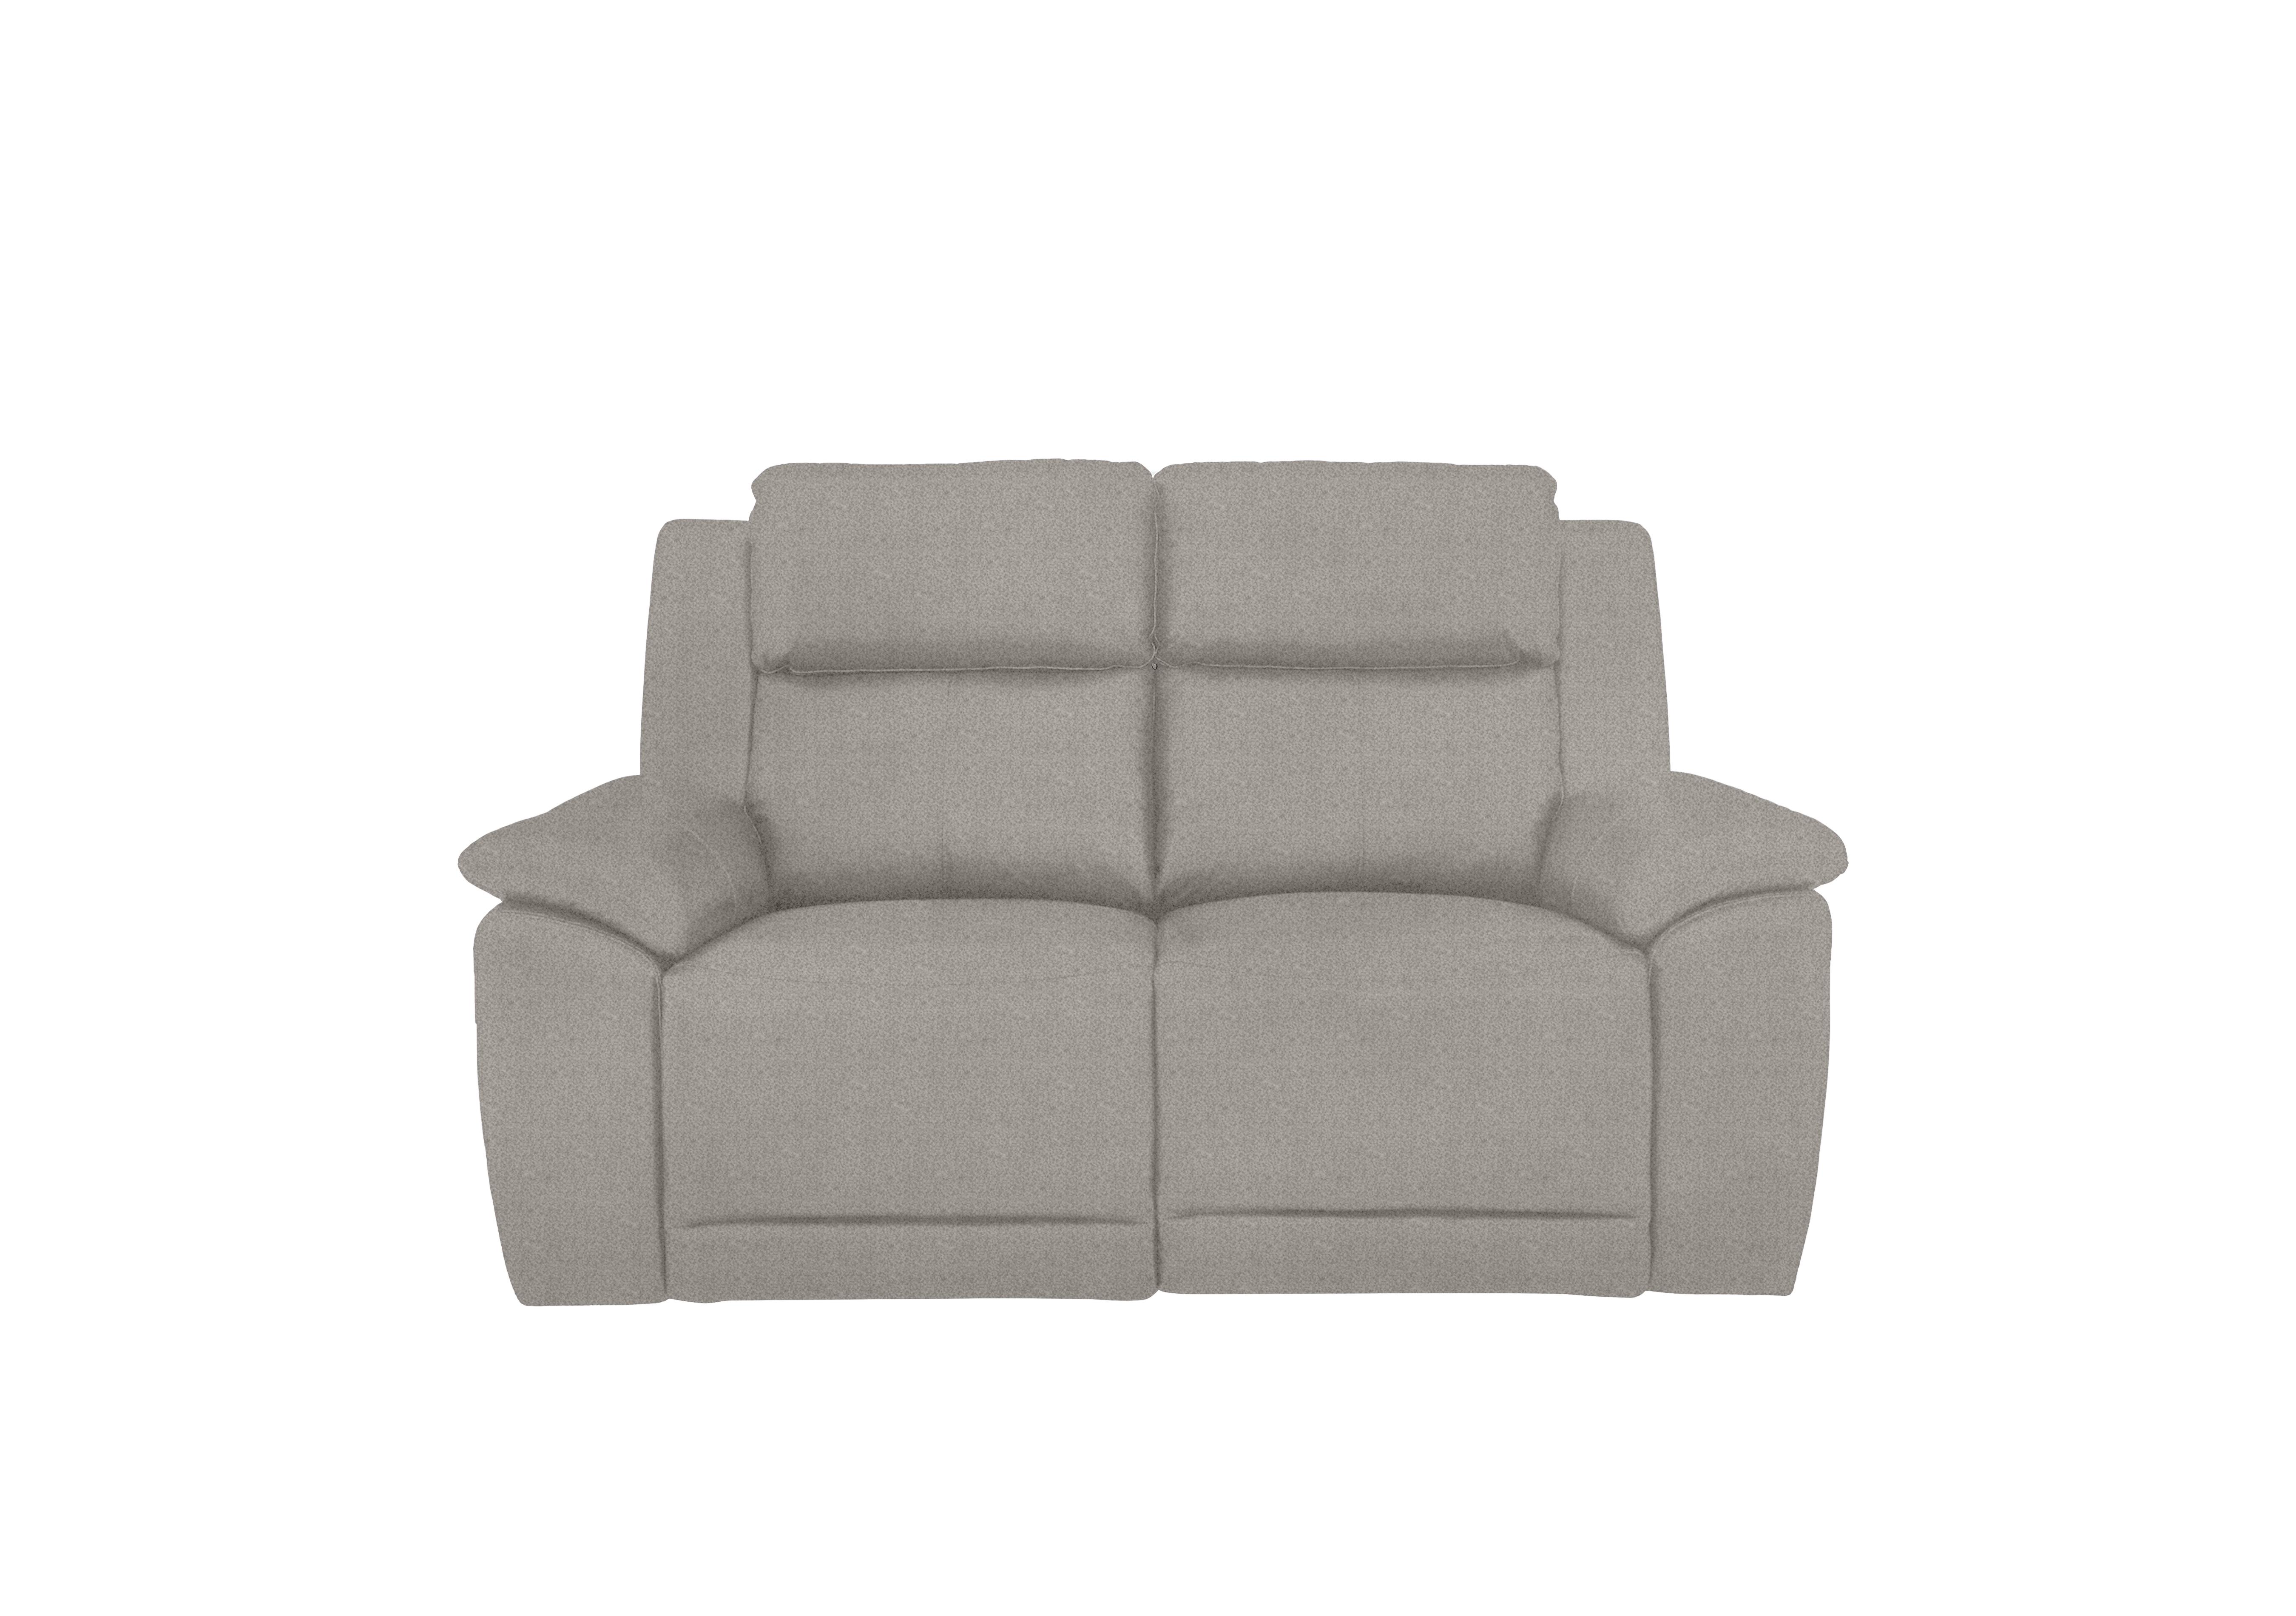 Utah 2 Seater Fabric Power Recliner Sofa with Power Headrests and Power Lumbar in Rosy Light Grey Rs-0102 on Furniture Village